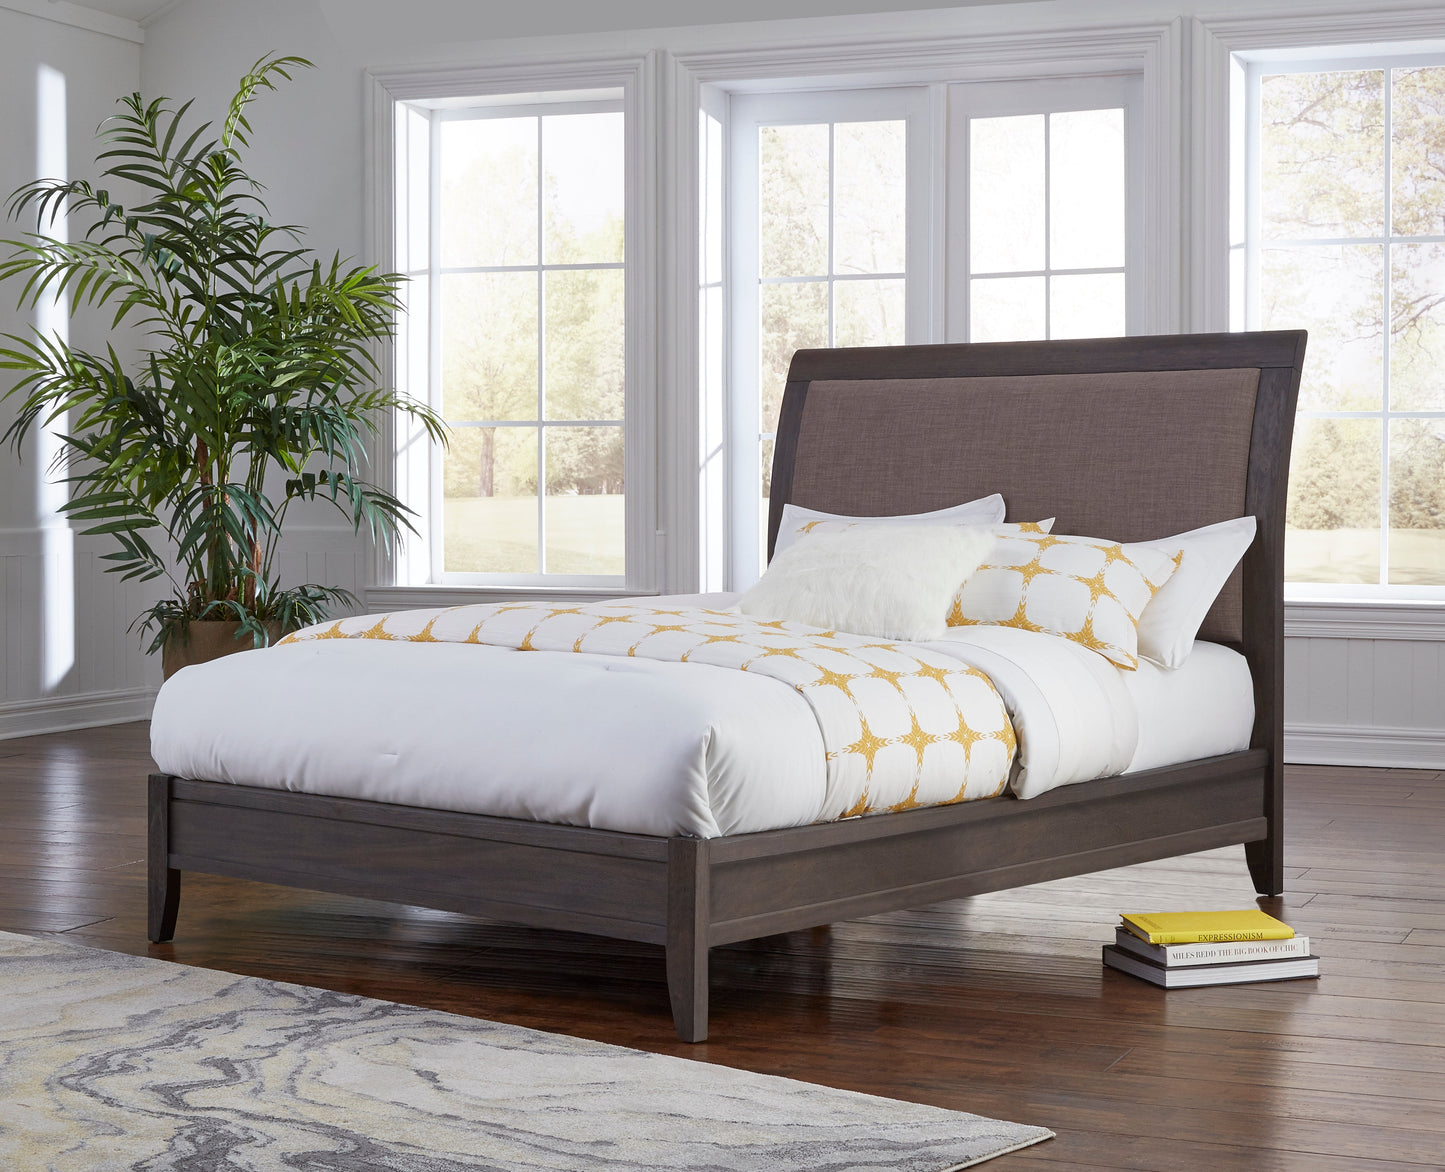 Modus City II Cal King Bed in Dolphin